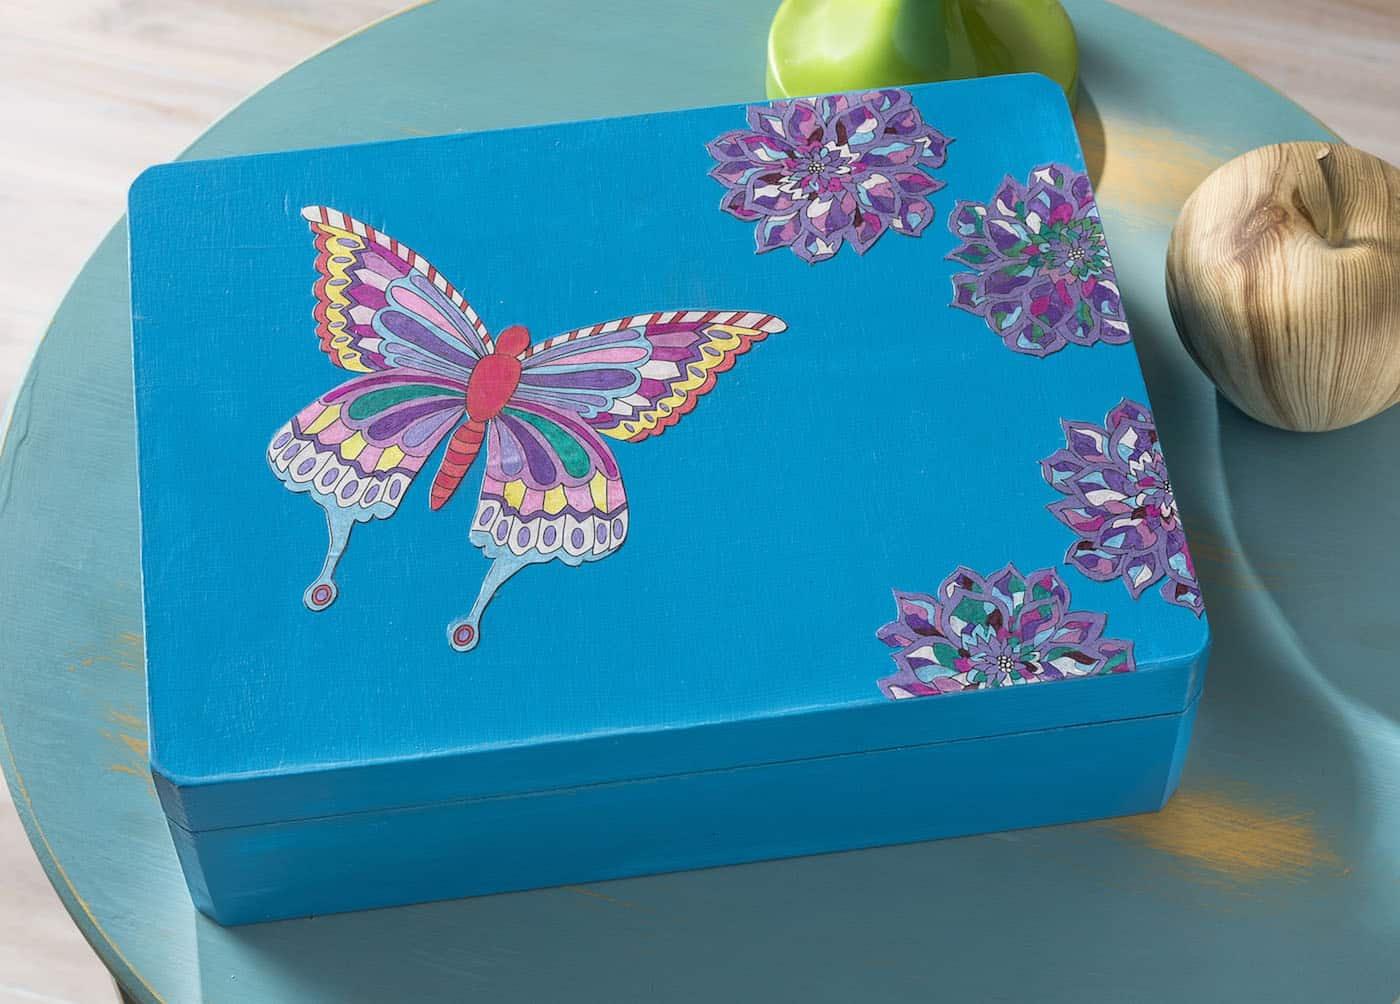 Learn how to decorate a box with paint, coloring pages, and Mod Podge